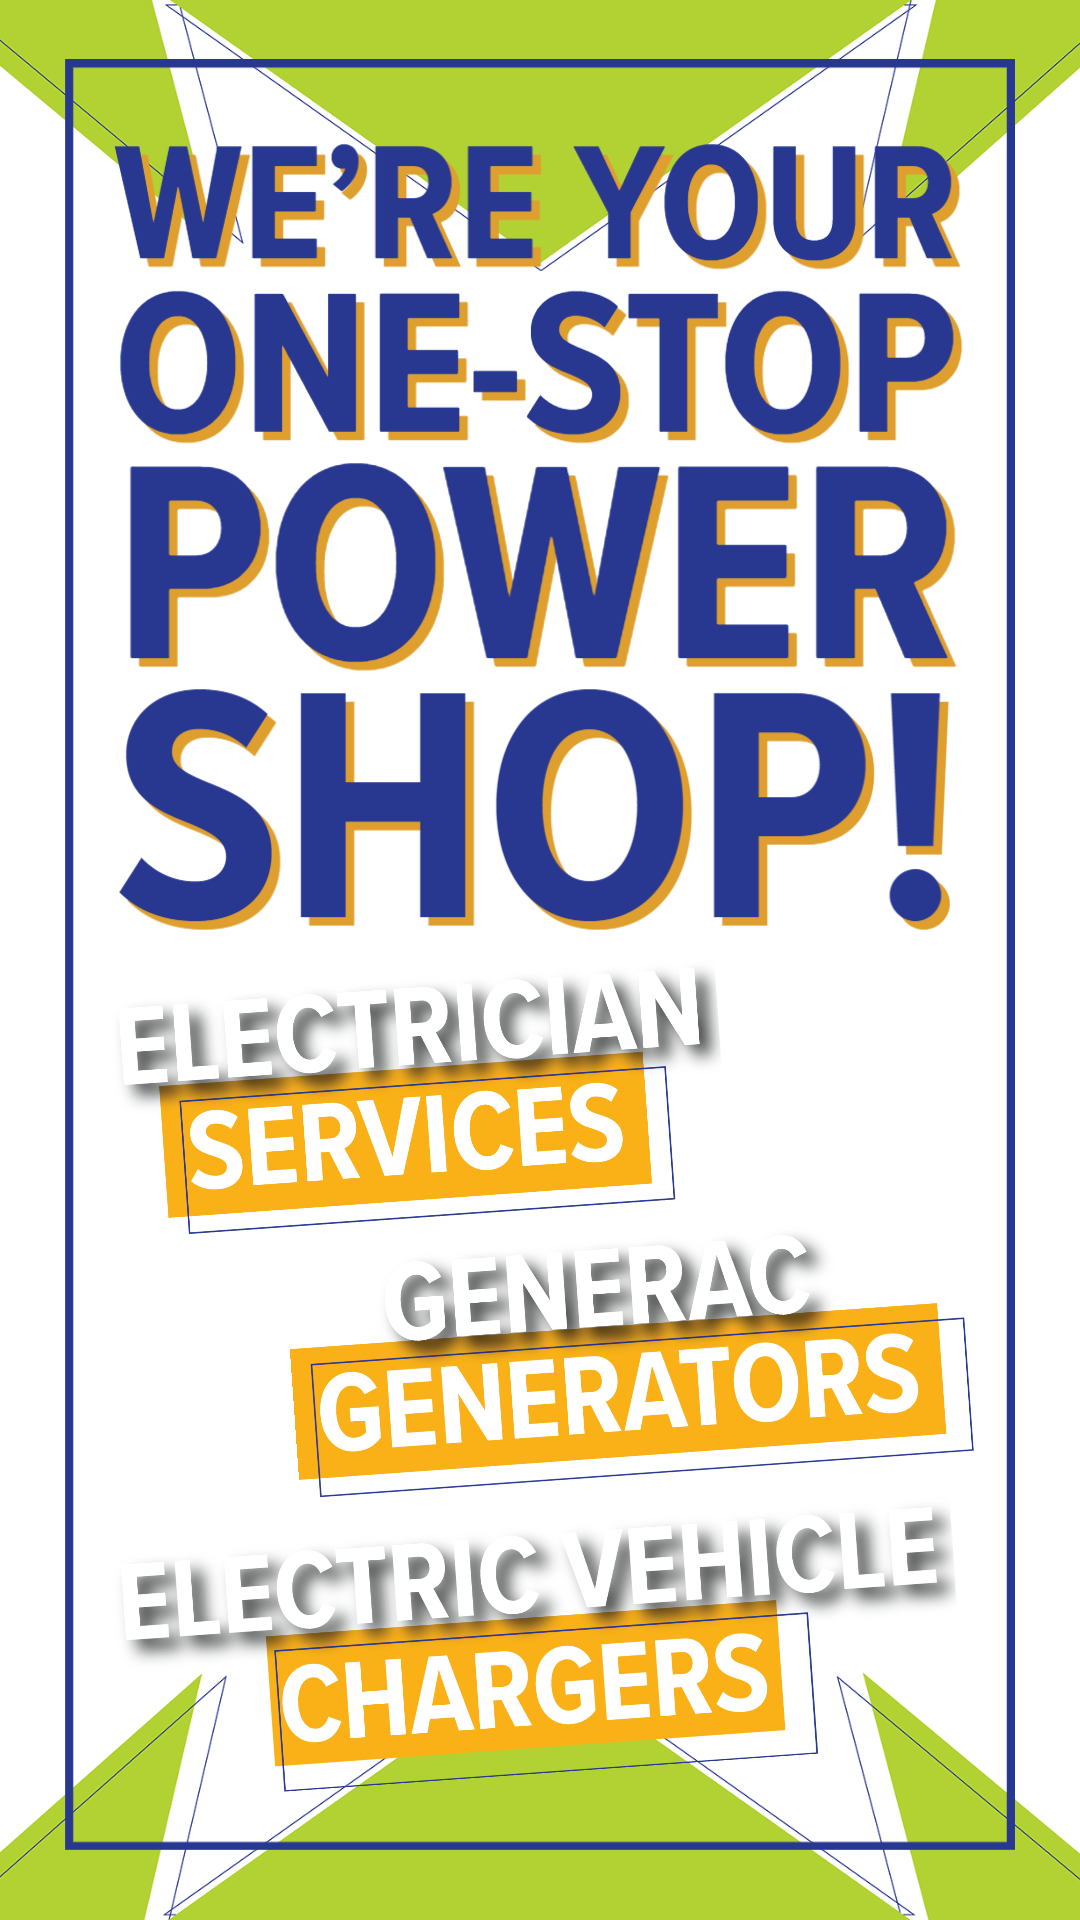 We're Your One Stop Power Shop